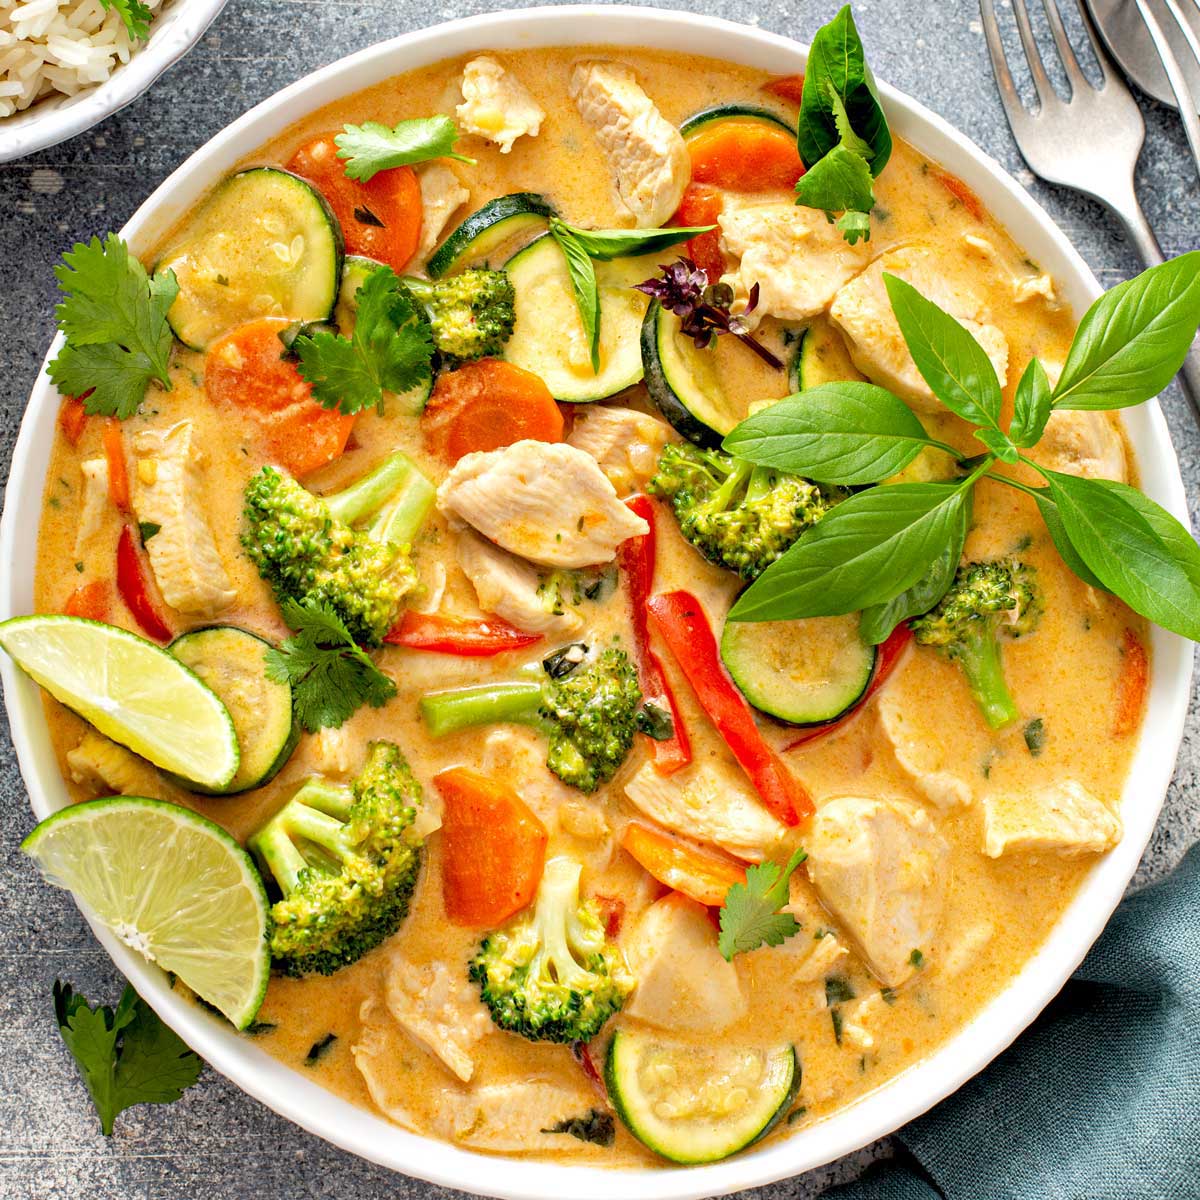 What Vegetables Go With Chicken Curry